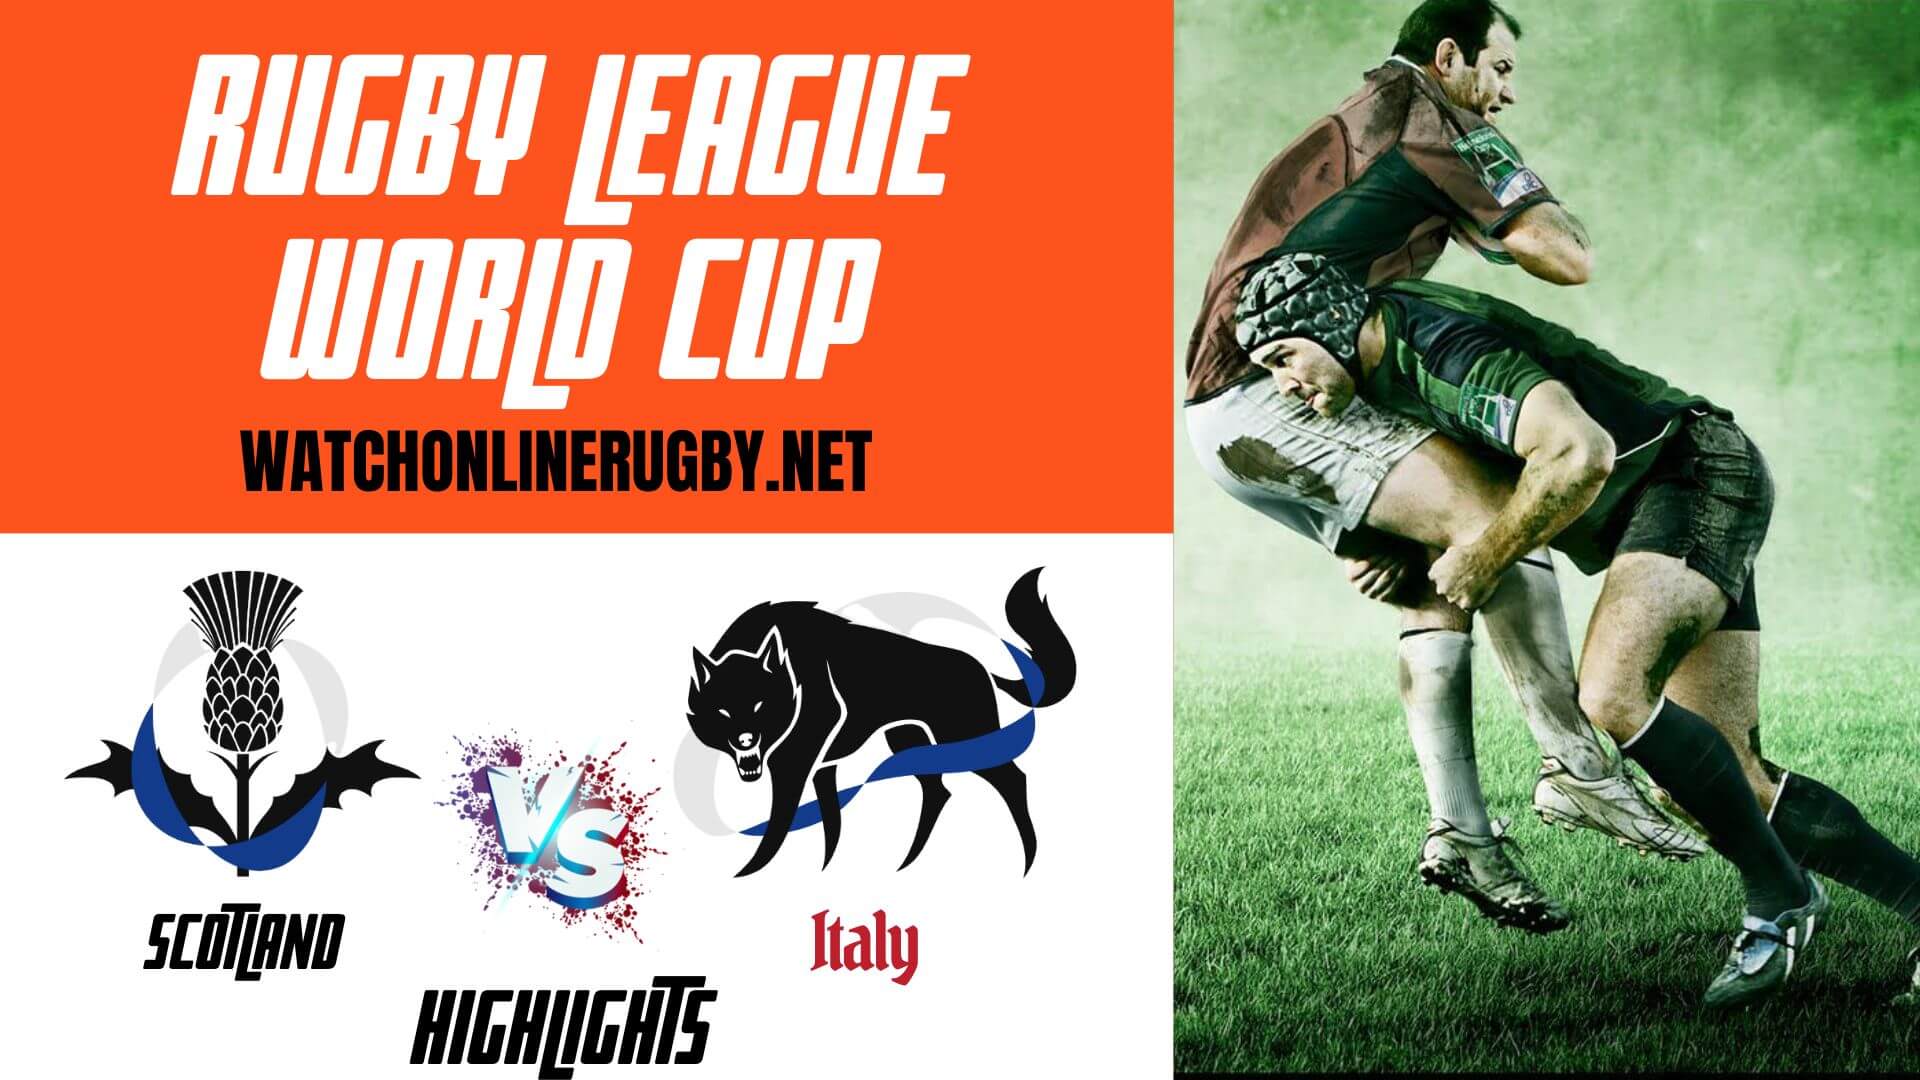 Scotland Vs Italy Rugby League World Cup 2022 RD 1